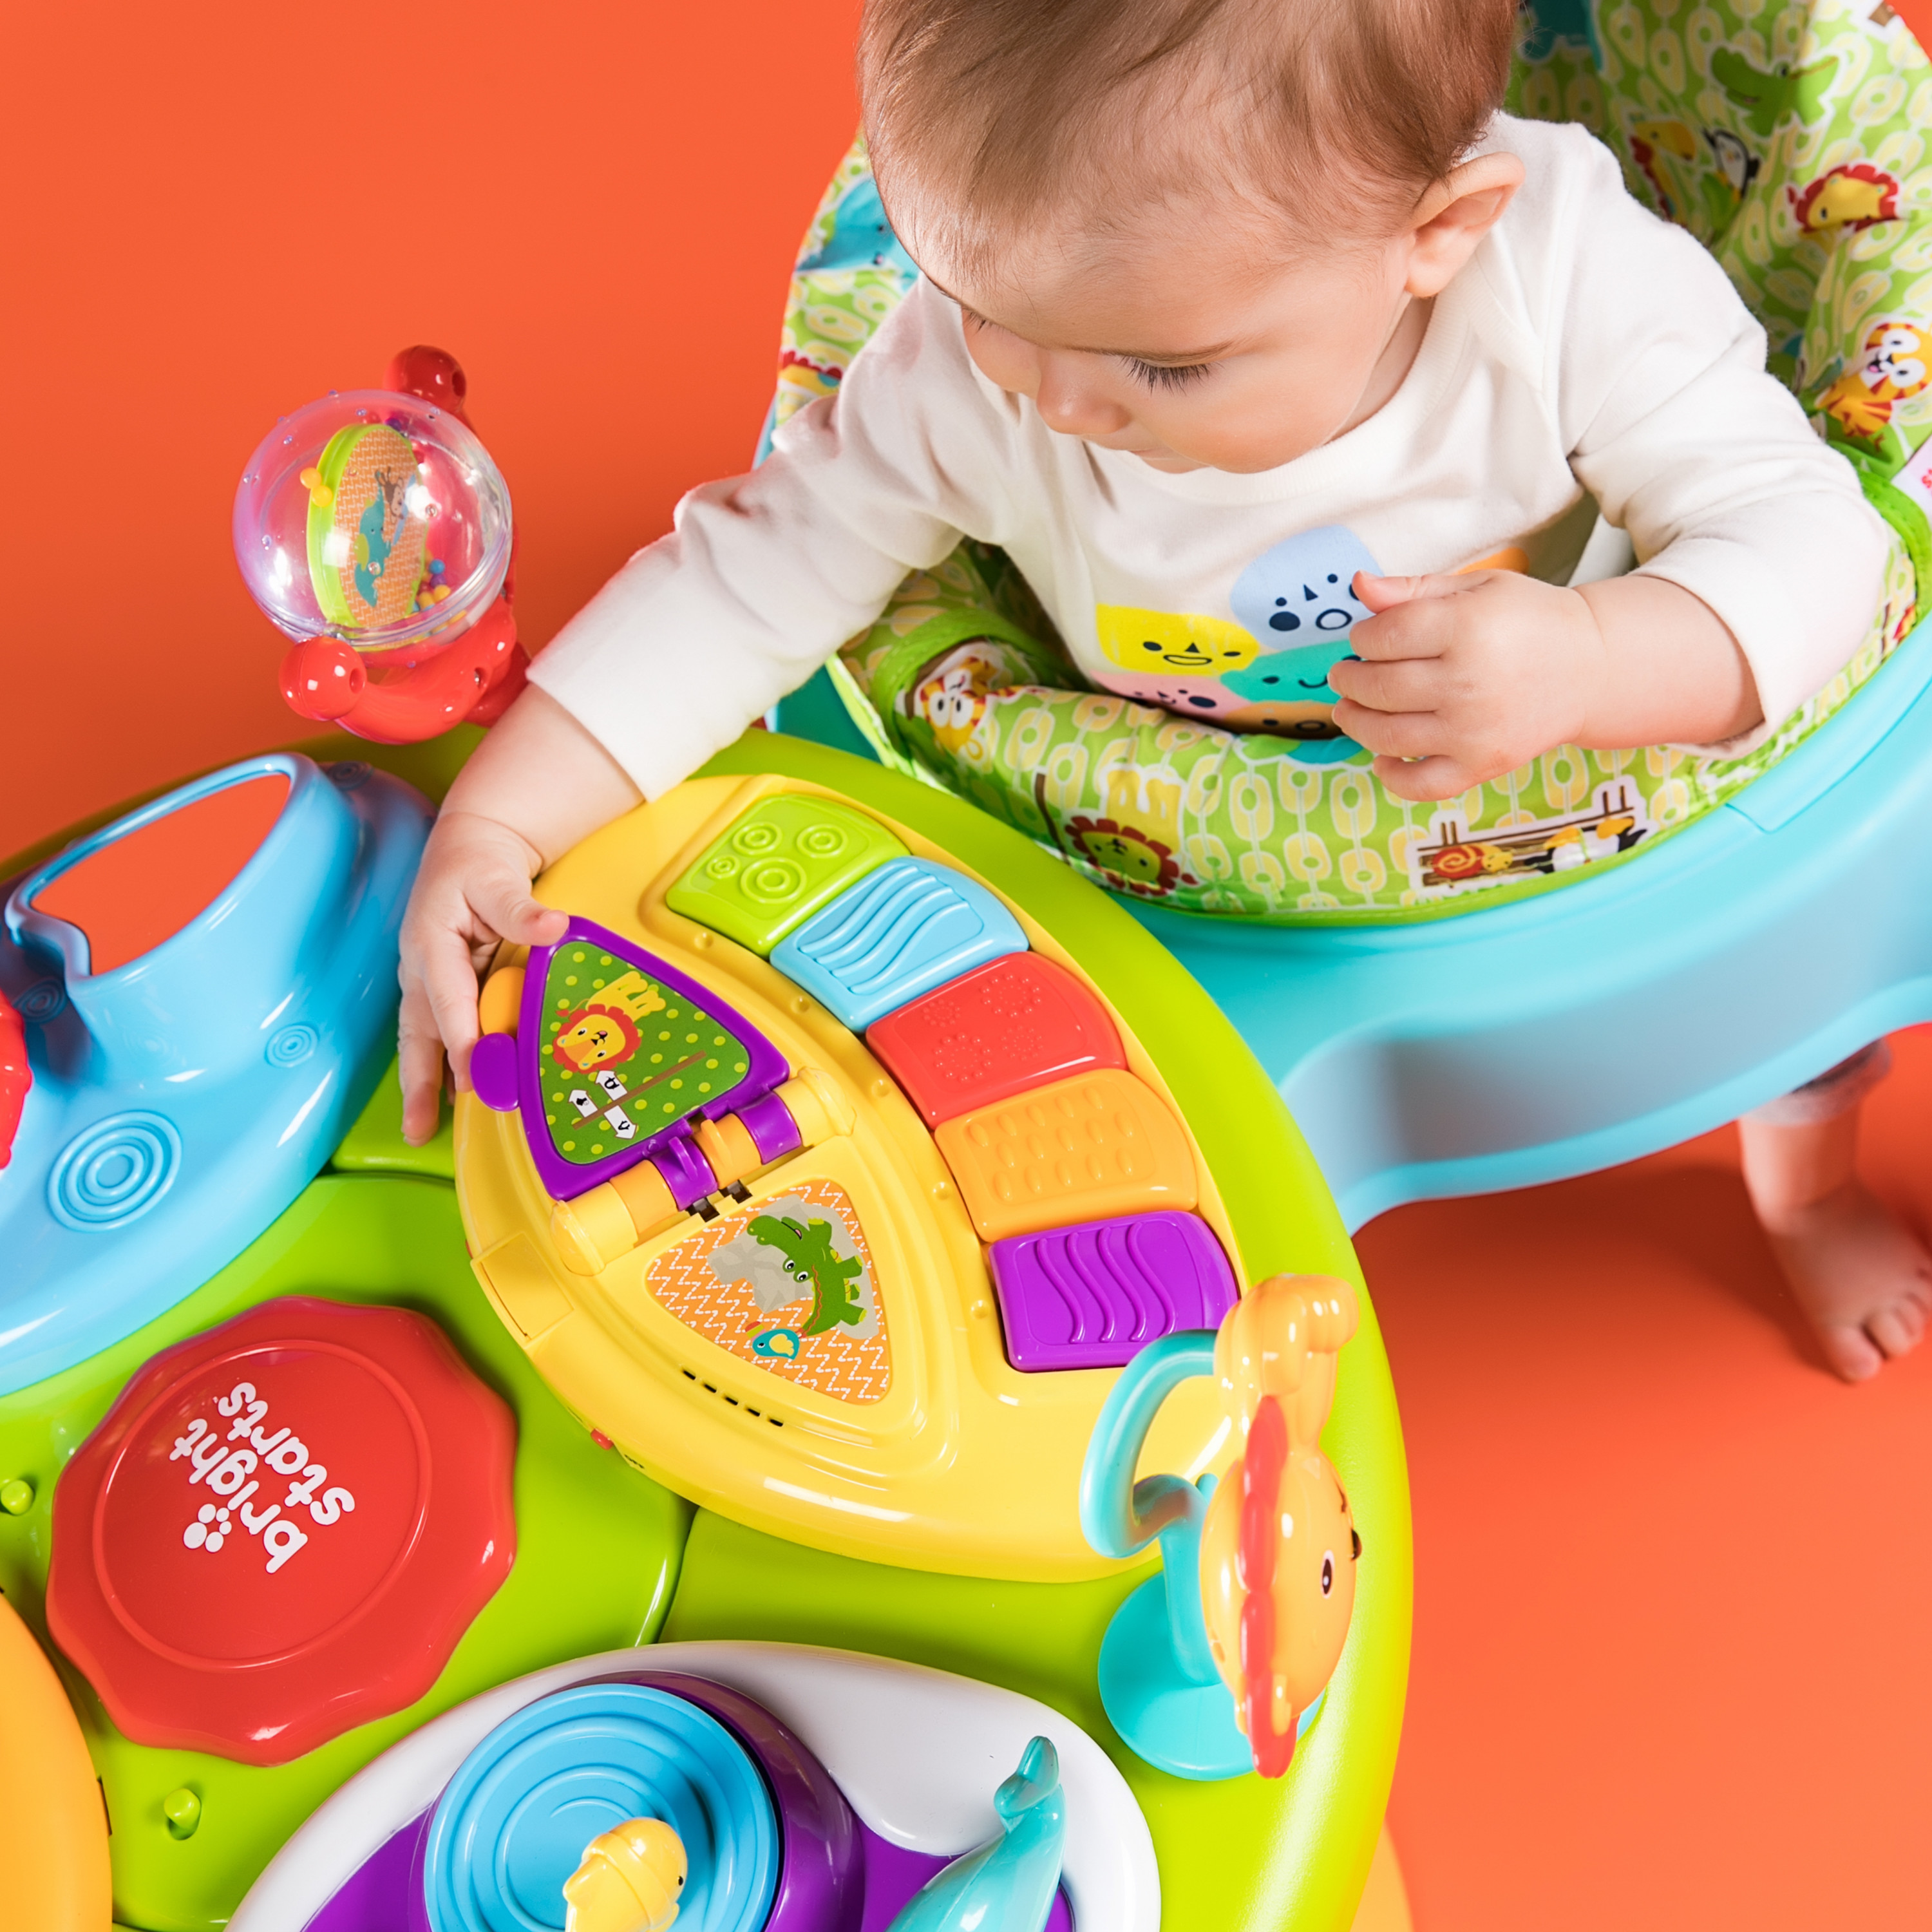 Bright Starts 3-in-1 Around We Go Activity Center, Ages 6 months + - image 5 of 7